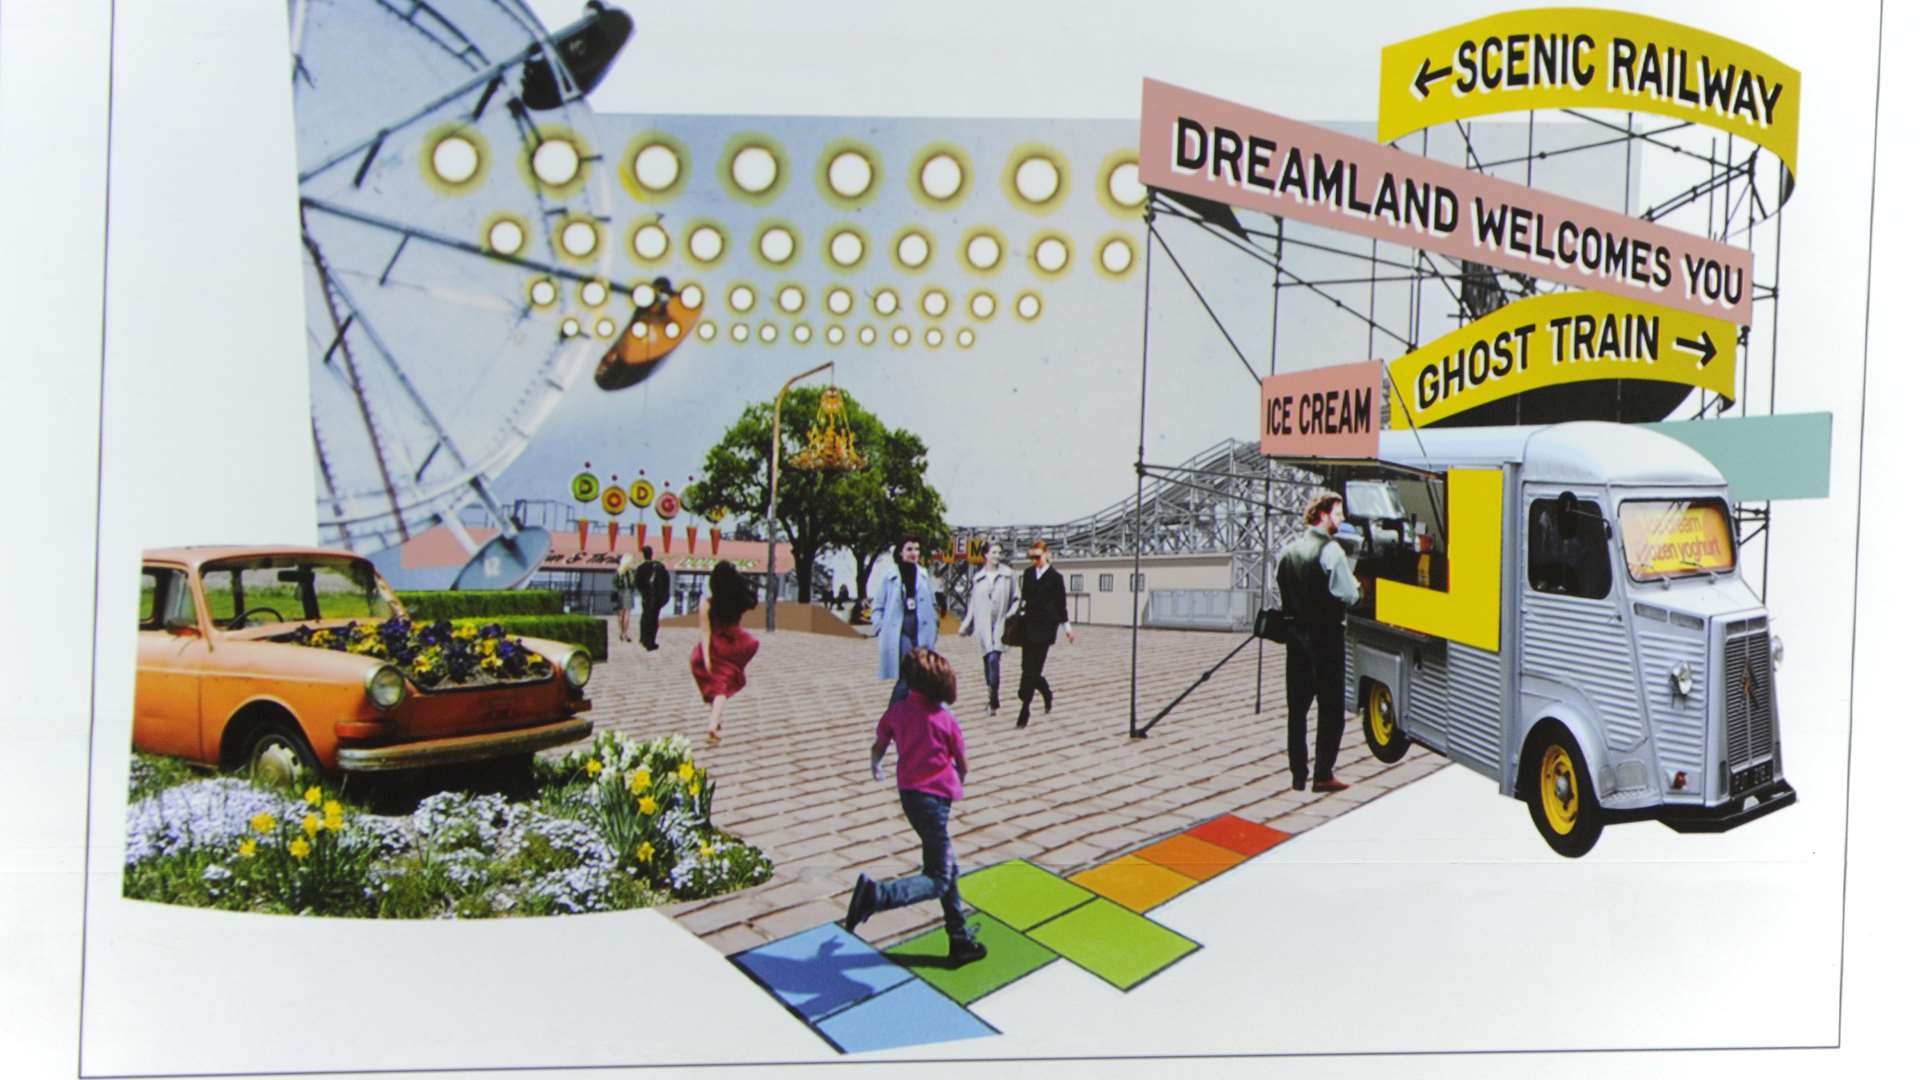 Plans unveiled for Dreamland